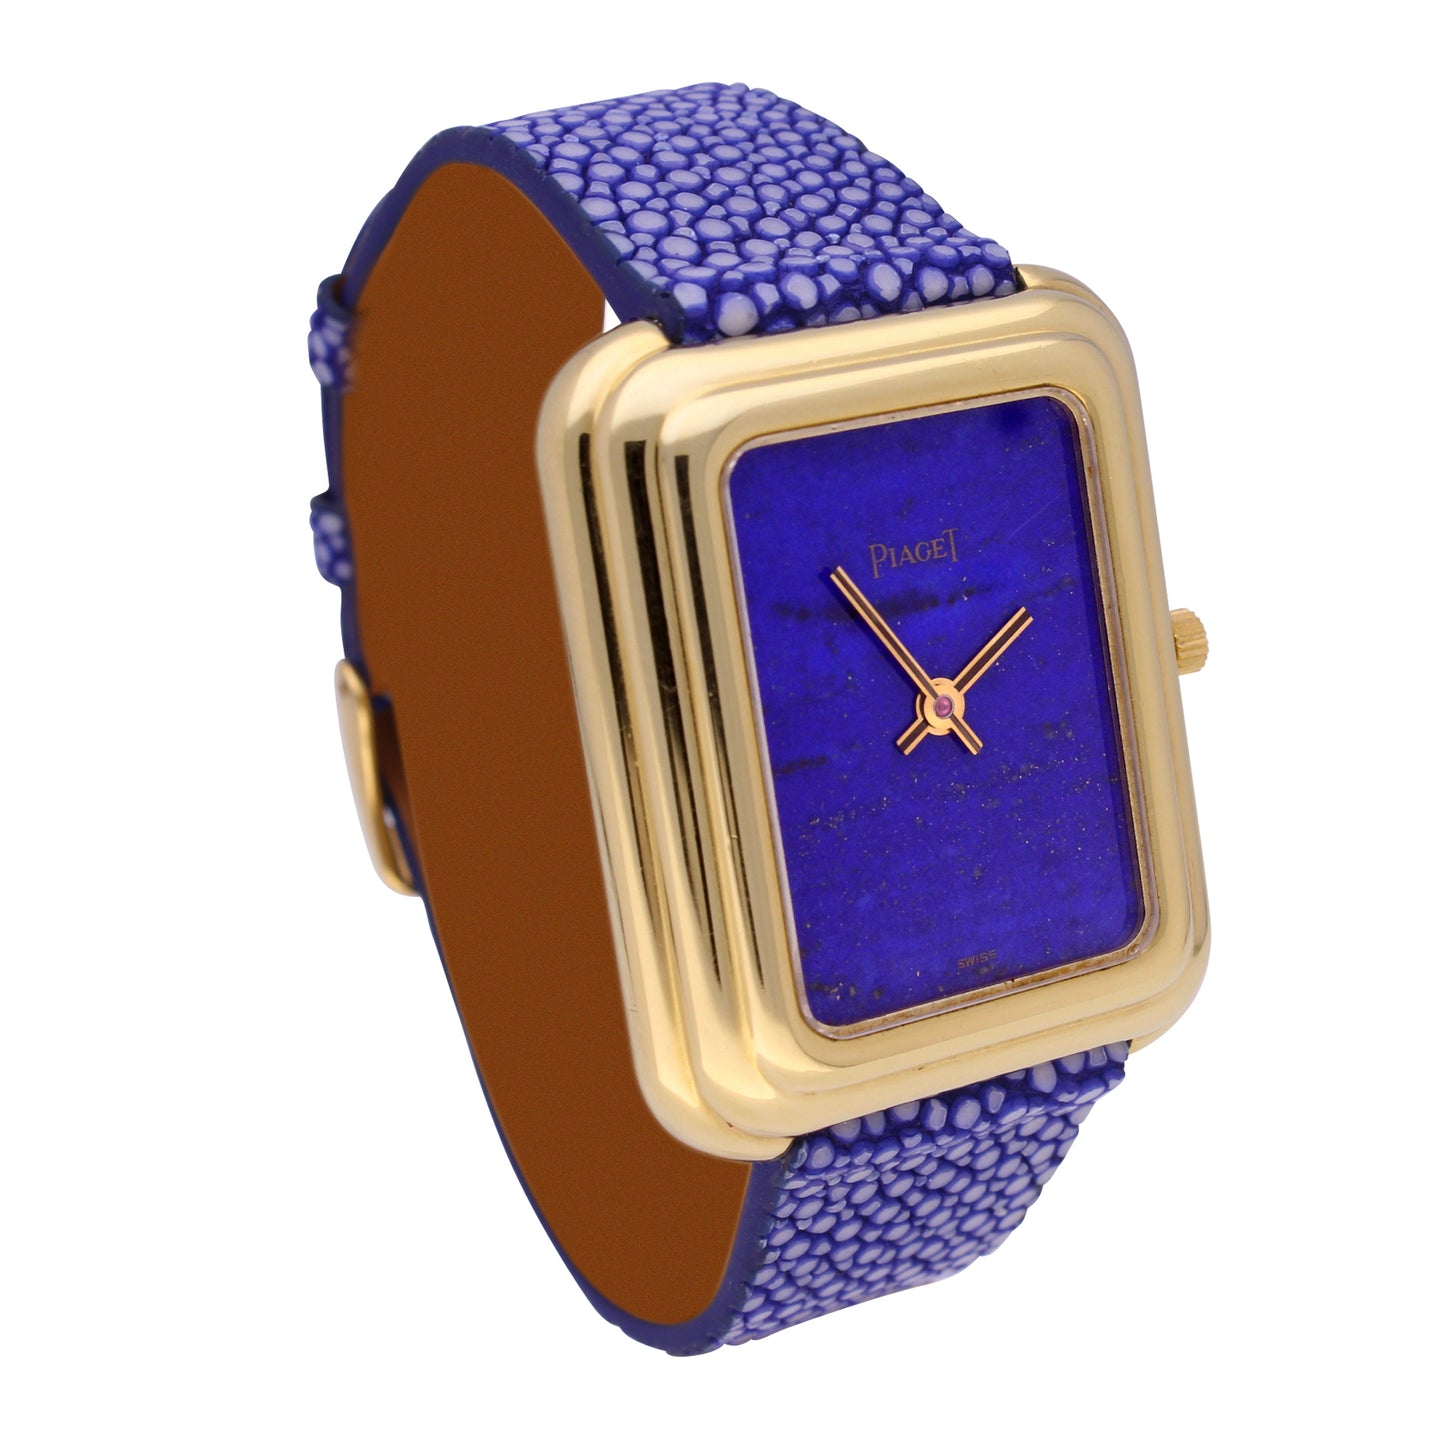 18ct yellow gold Piaget  Beta 21 reference 1401/1 wristwatch with lapis lazuli dial. Made 1972